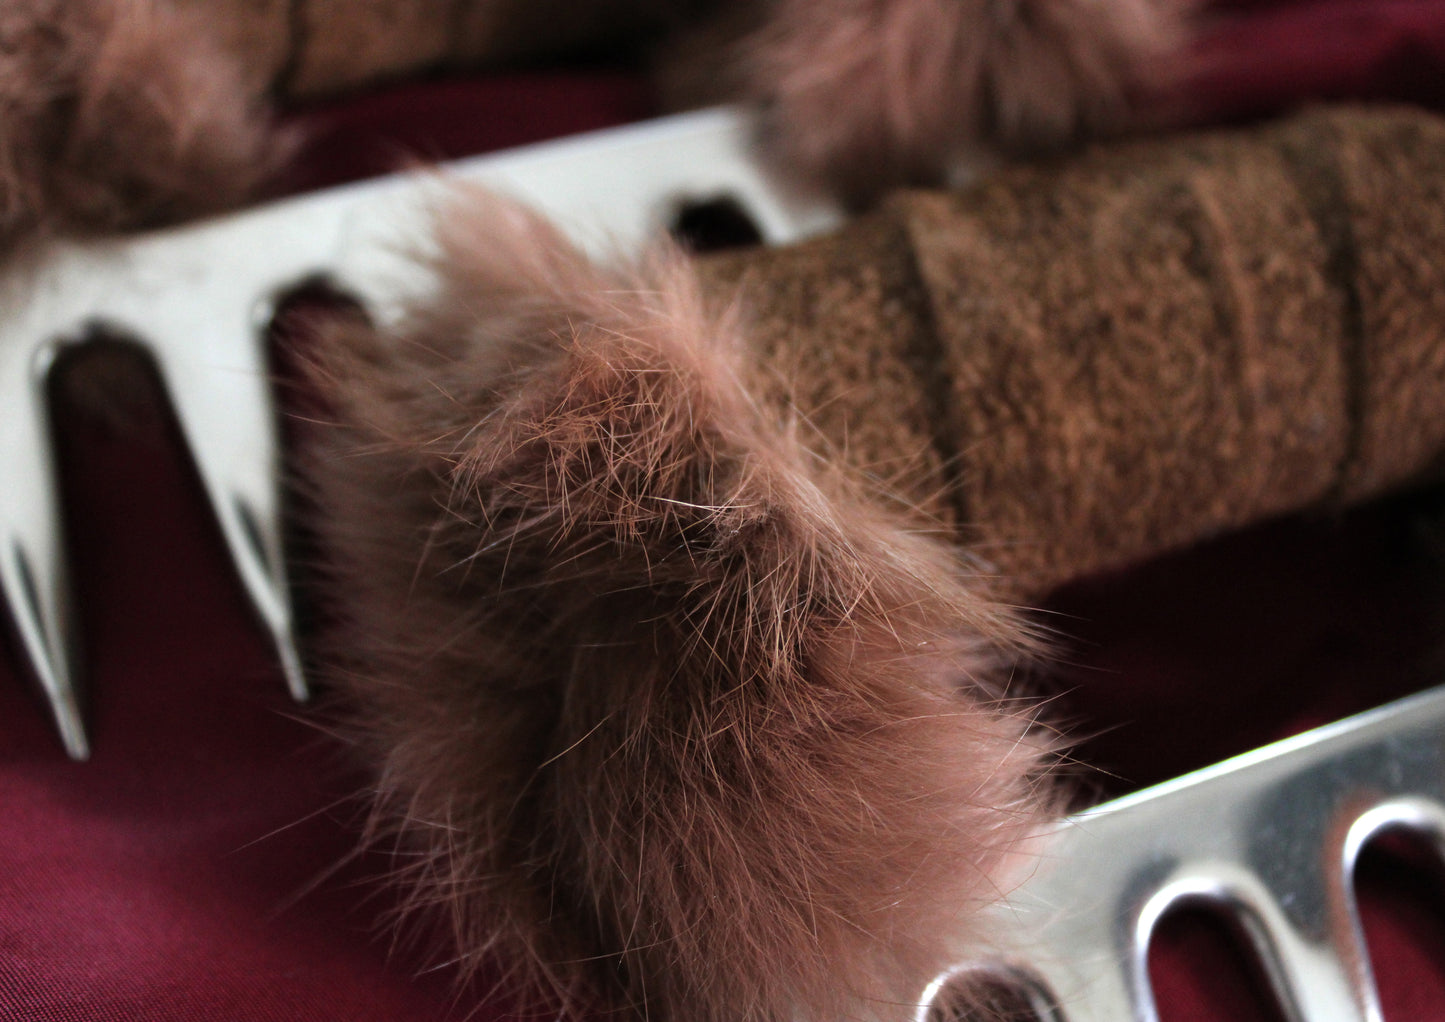 Primal claws, brown bear paws